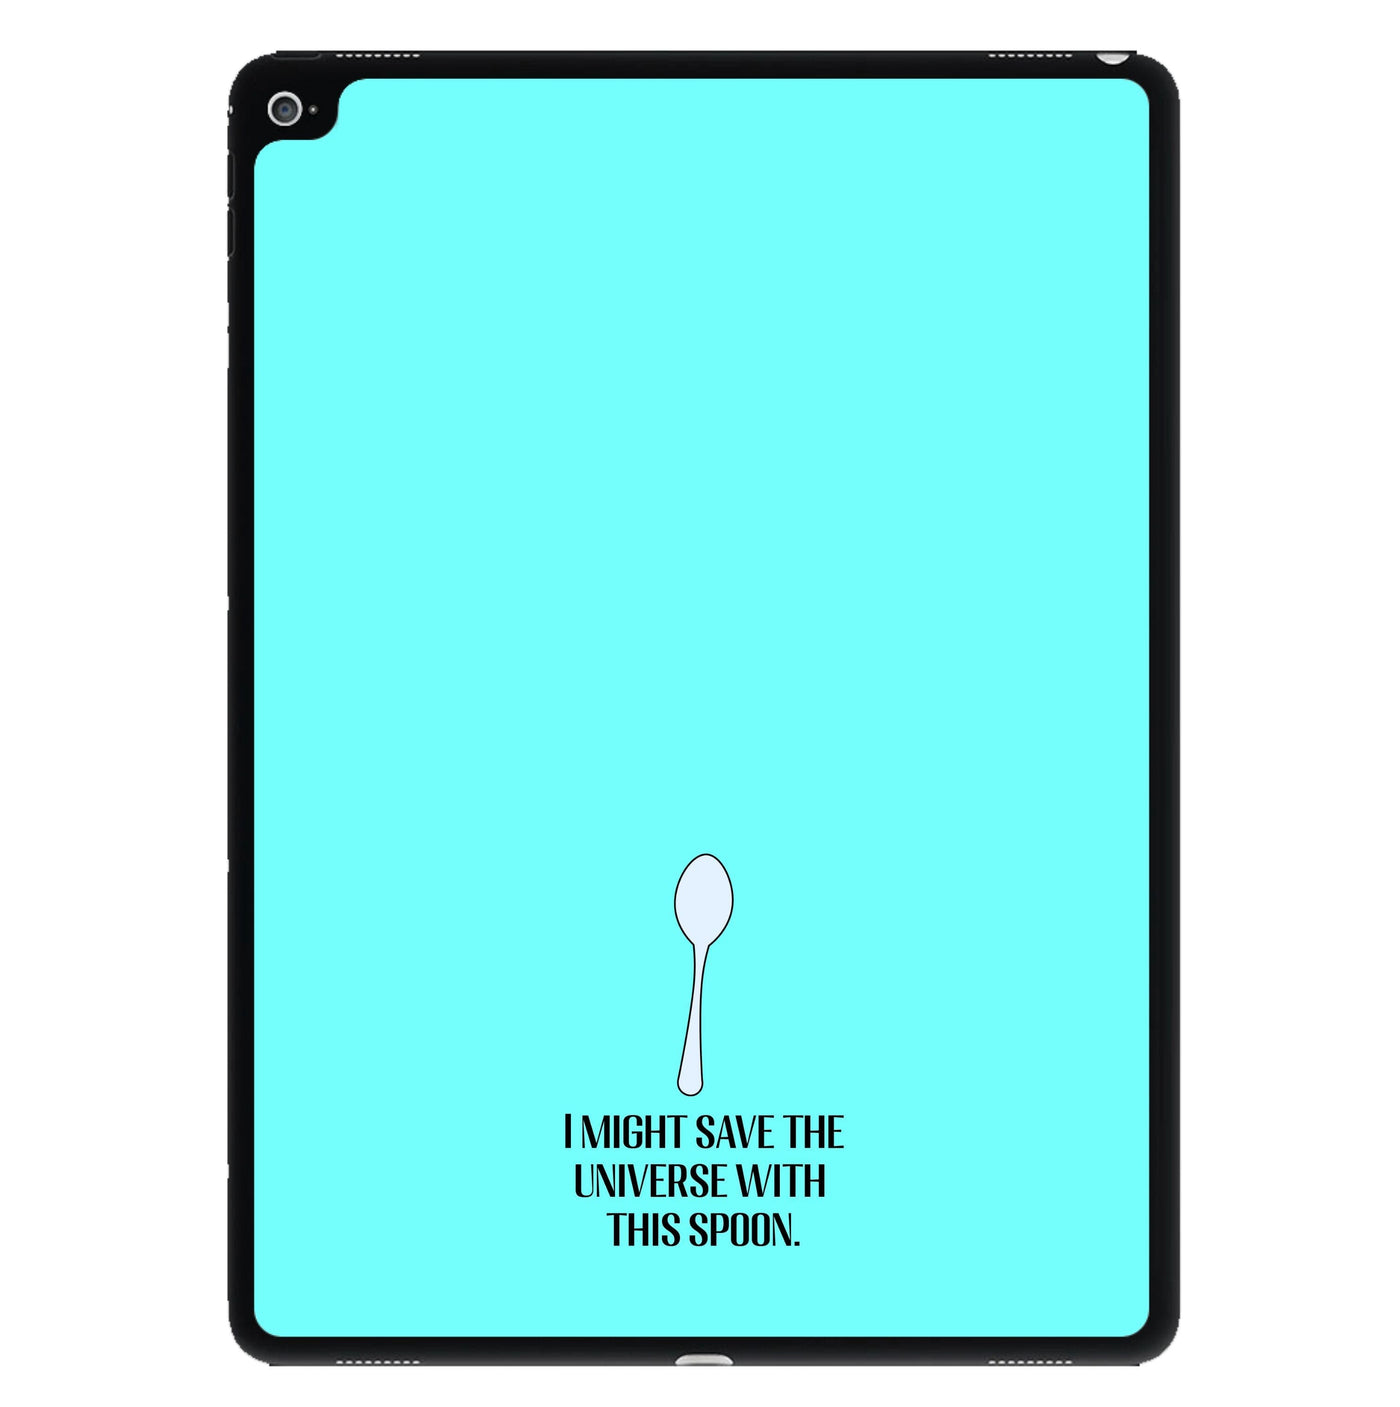 The Spoon - Doctor Who iPad Case